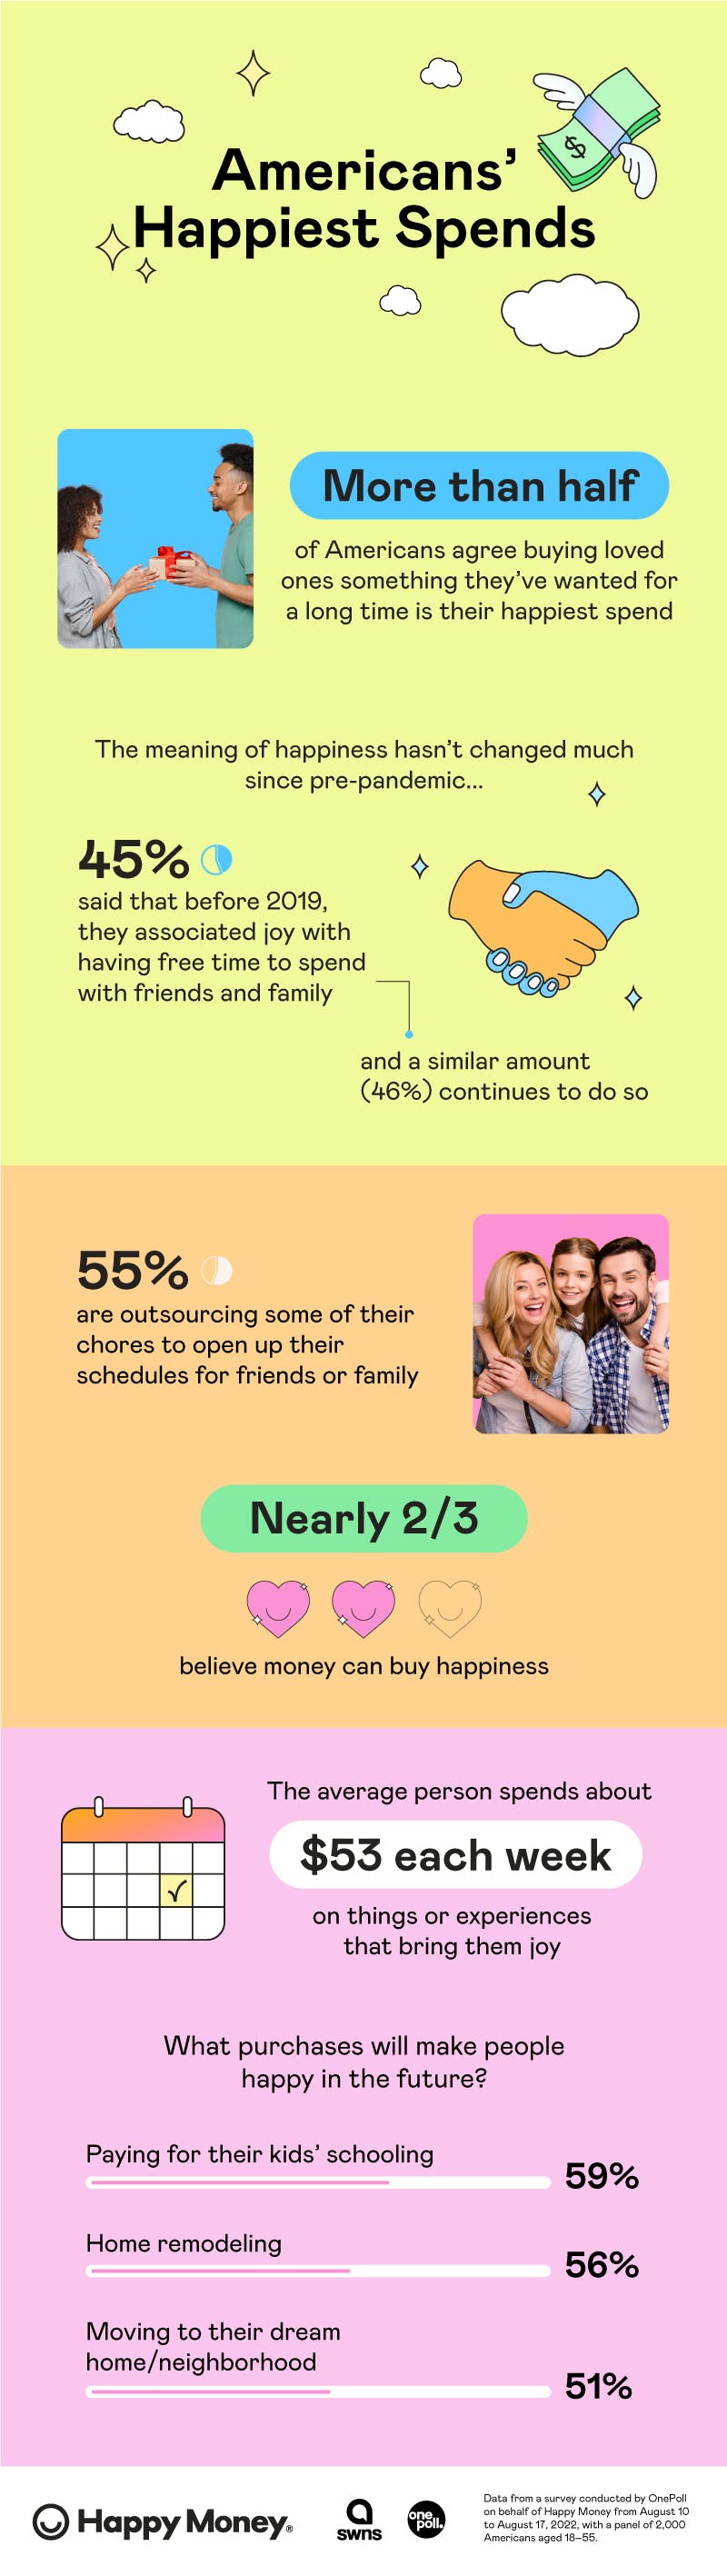 Americans' Happiest Spends